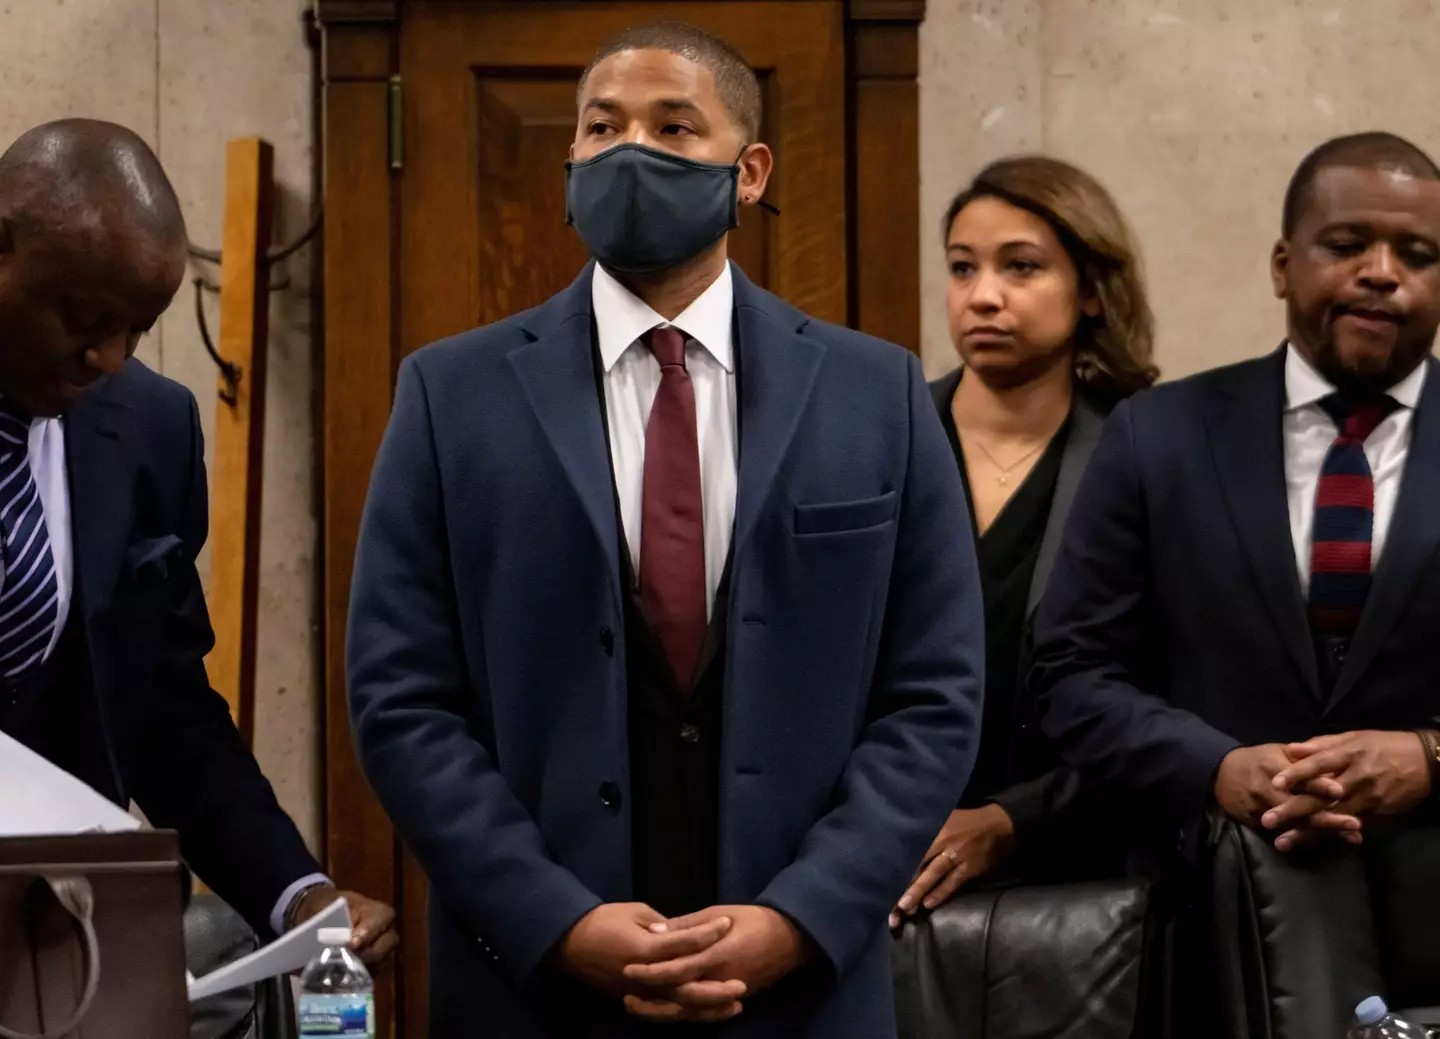 Smollett maintained he was not suicidal in court.